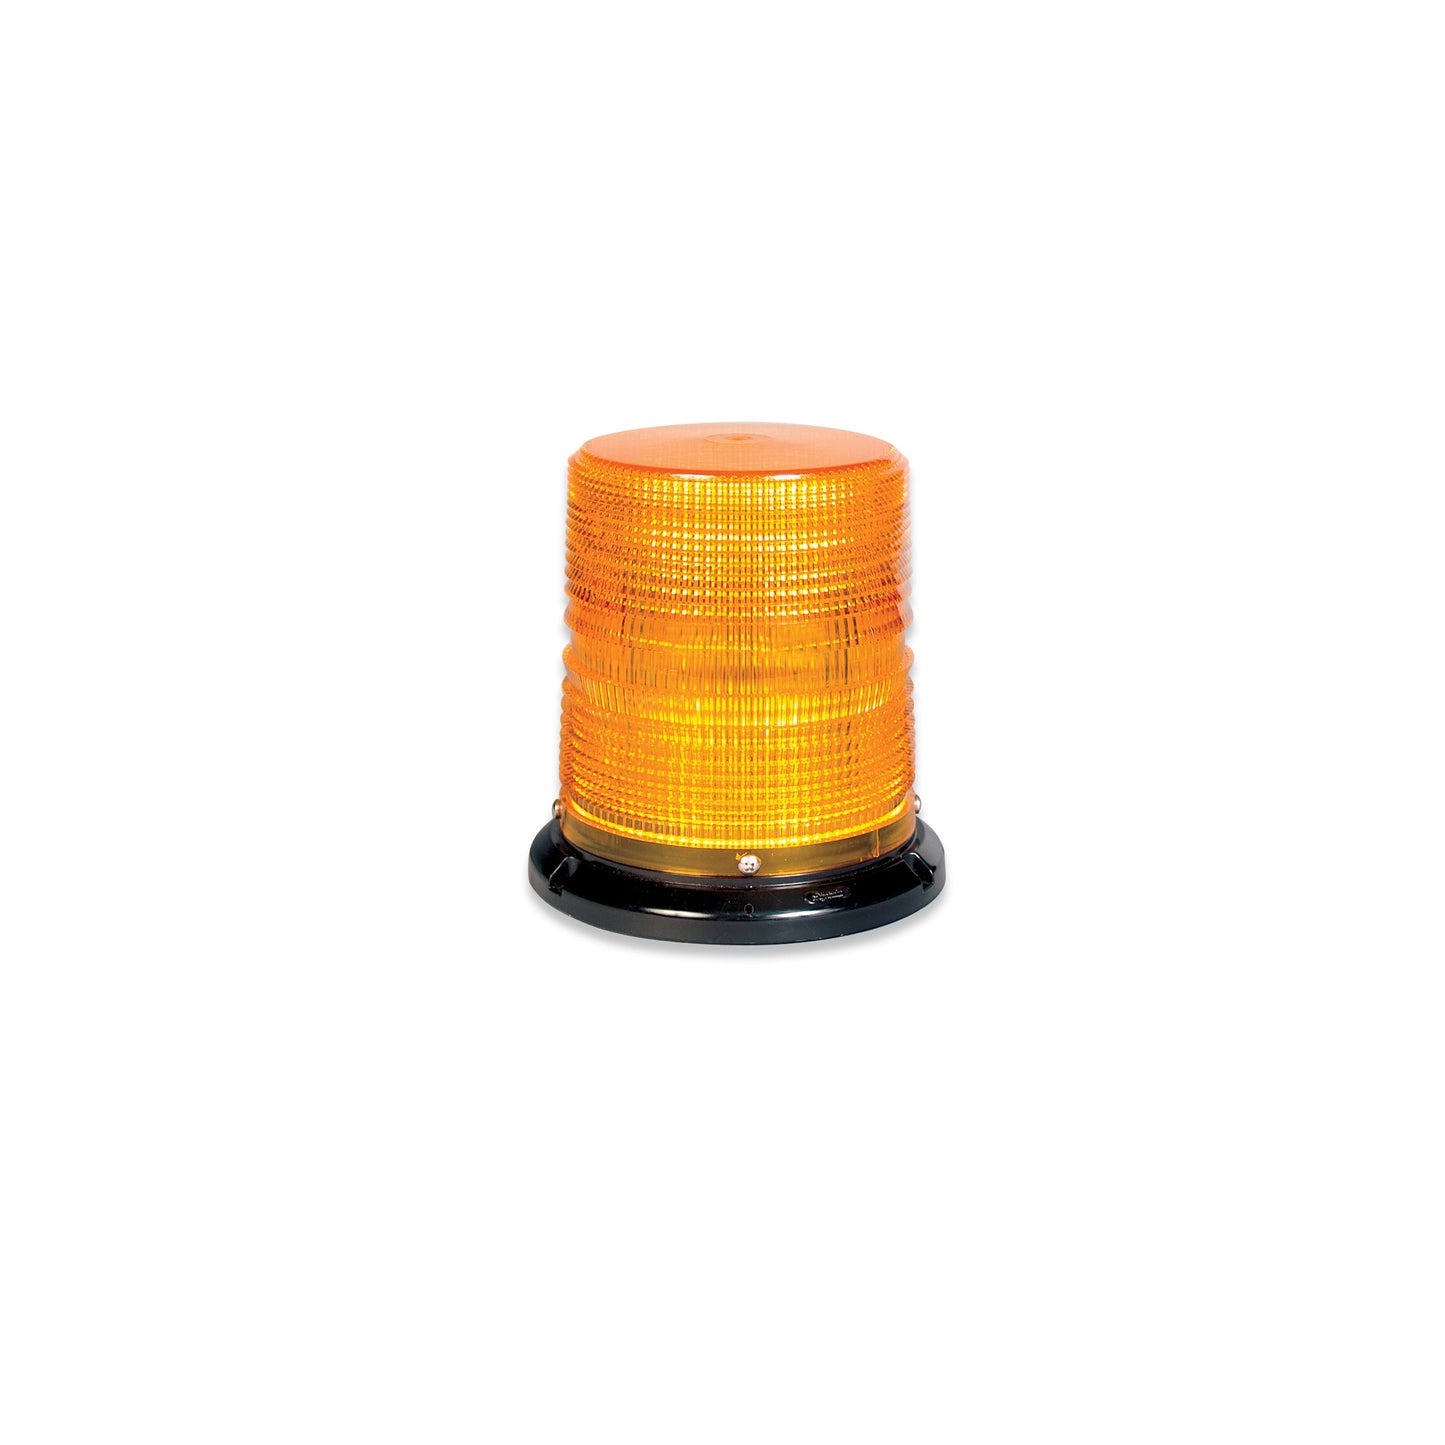 Soundoff Signal ELB42BCL0AC 4200 Series Led Beacon, 10-30V, Sae J845 Class 1 - Flat/Pipe Mount, 4"Clear Dome/ Amber Leds